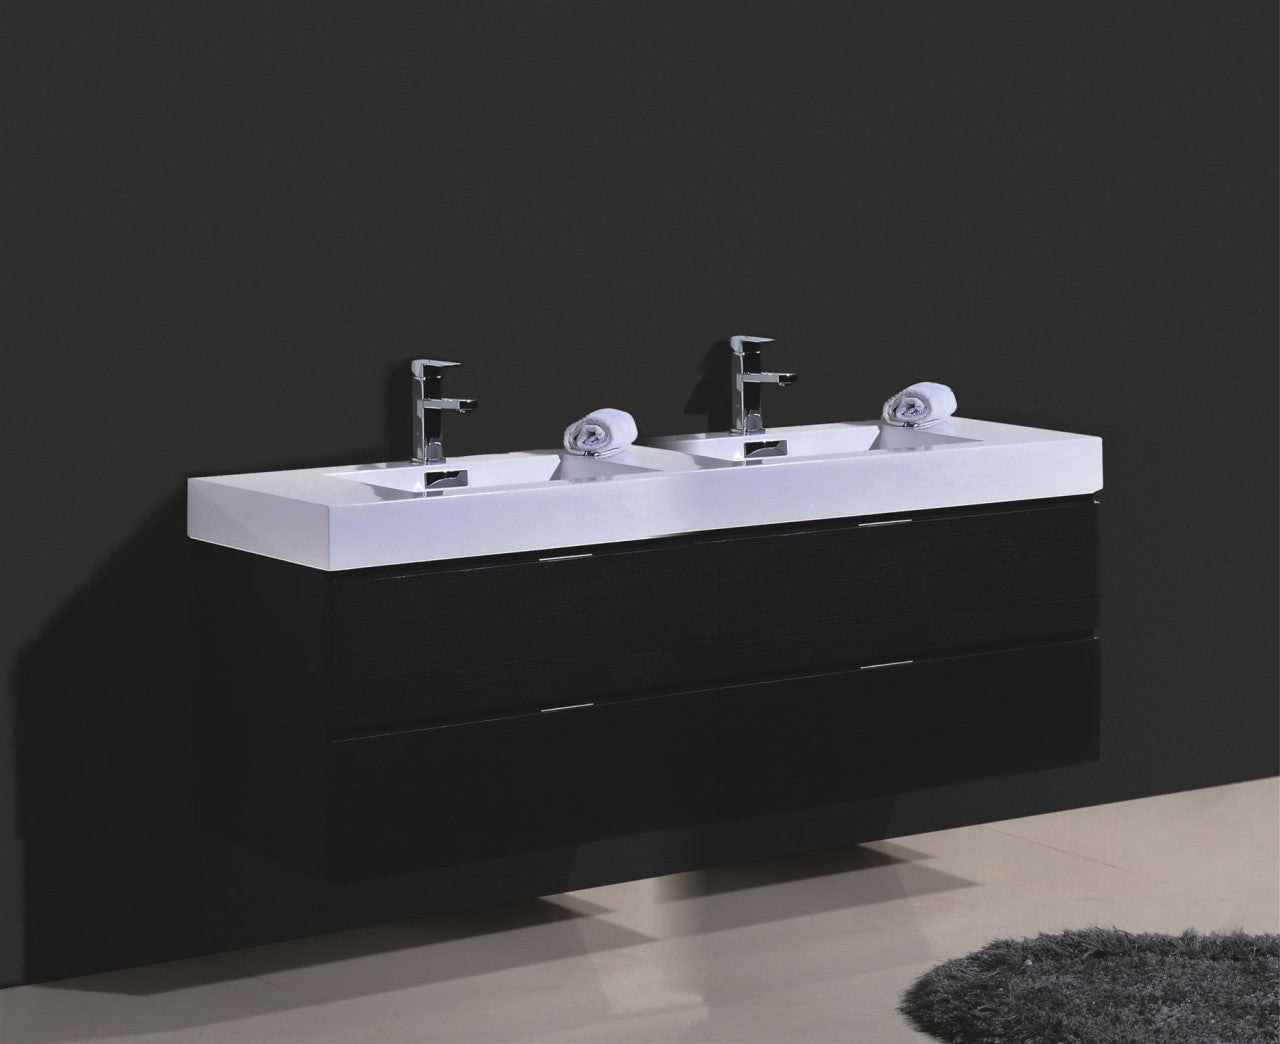 Bliss 80" Double Sink Wall Mount Modern Bathroom Vanity - Home and Bath Depot